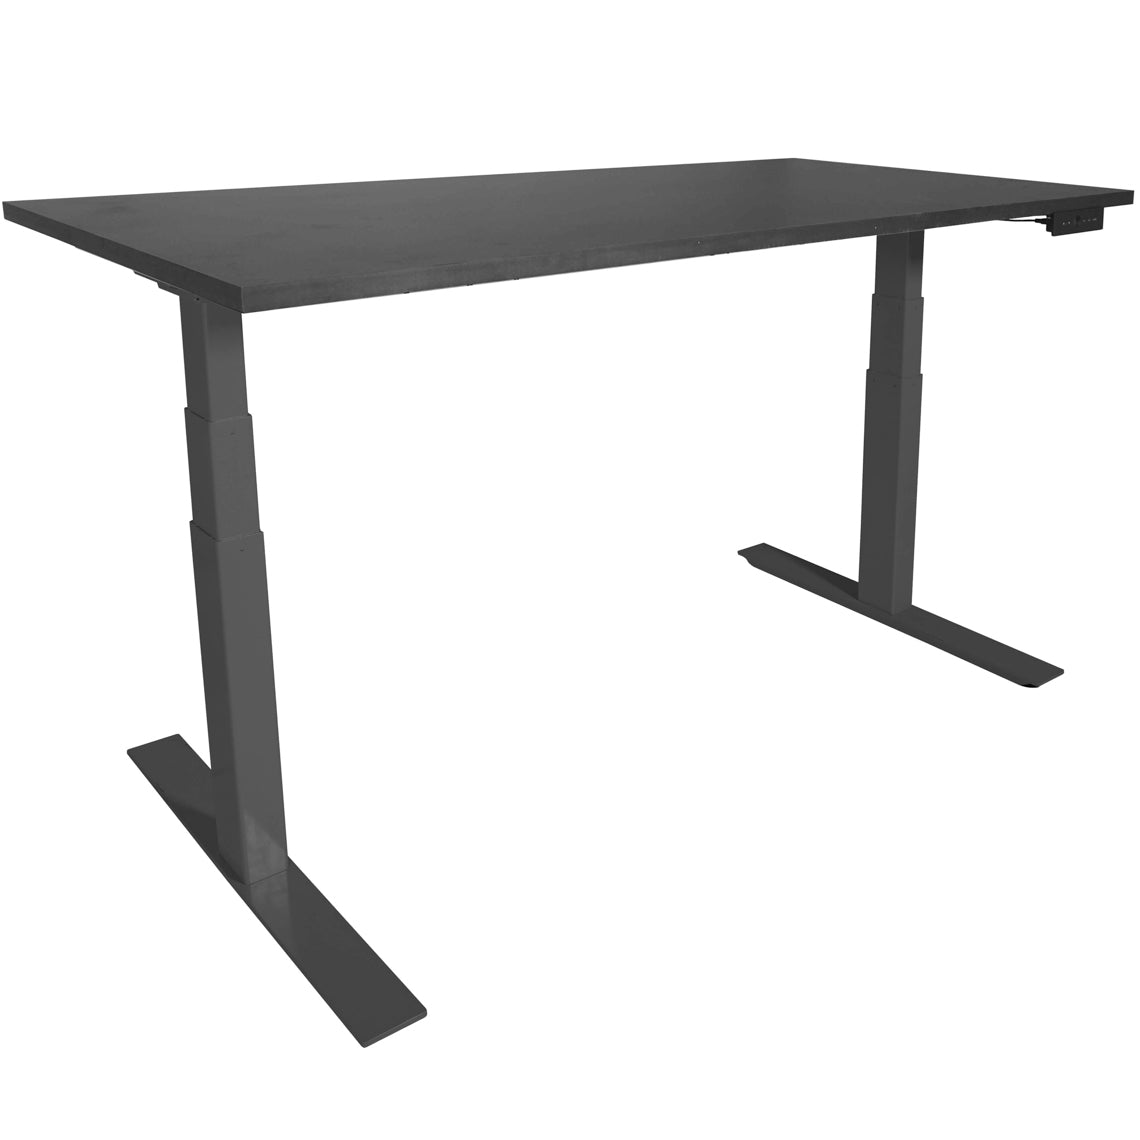 A6 Adjustable Sit To Stand Desk 24"- 50" w/ Black 30" x 48" Top - view 1